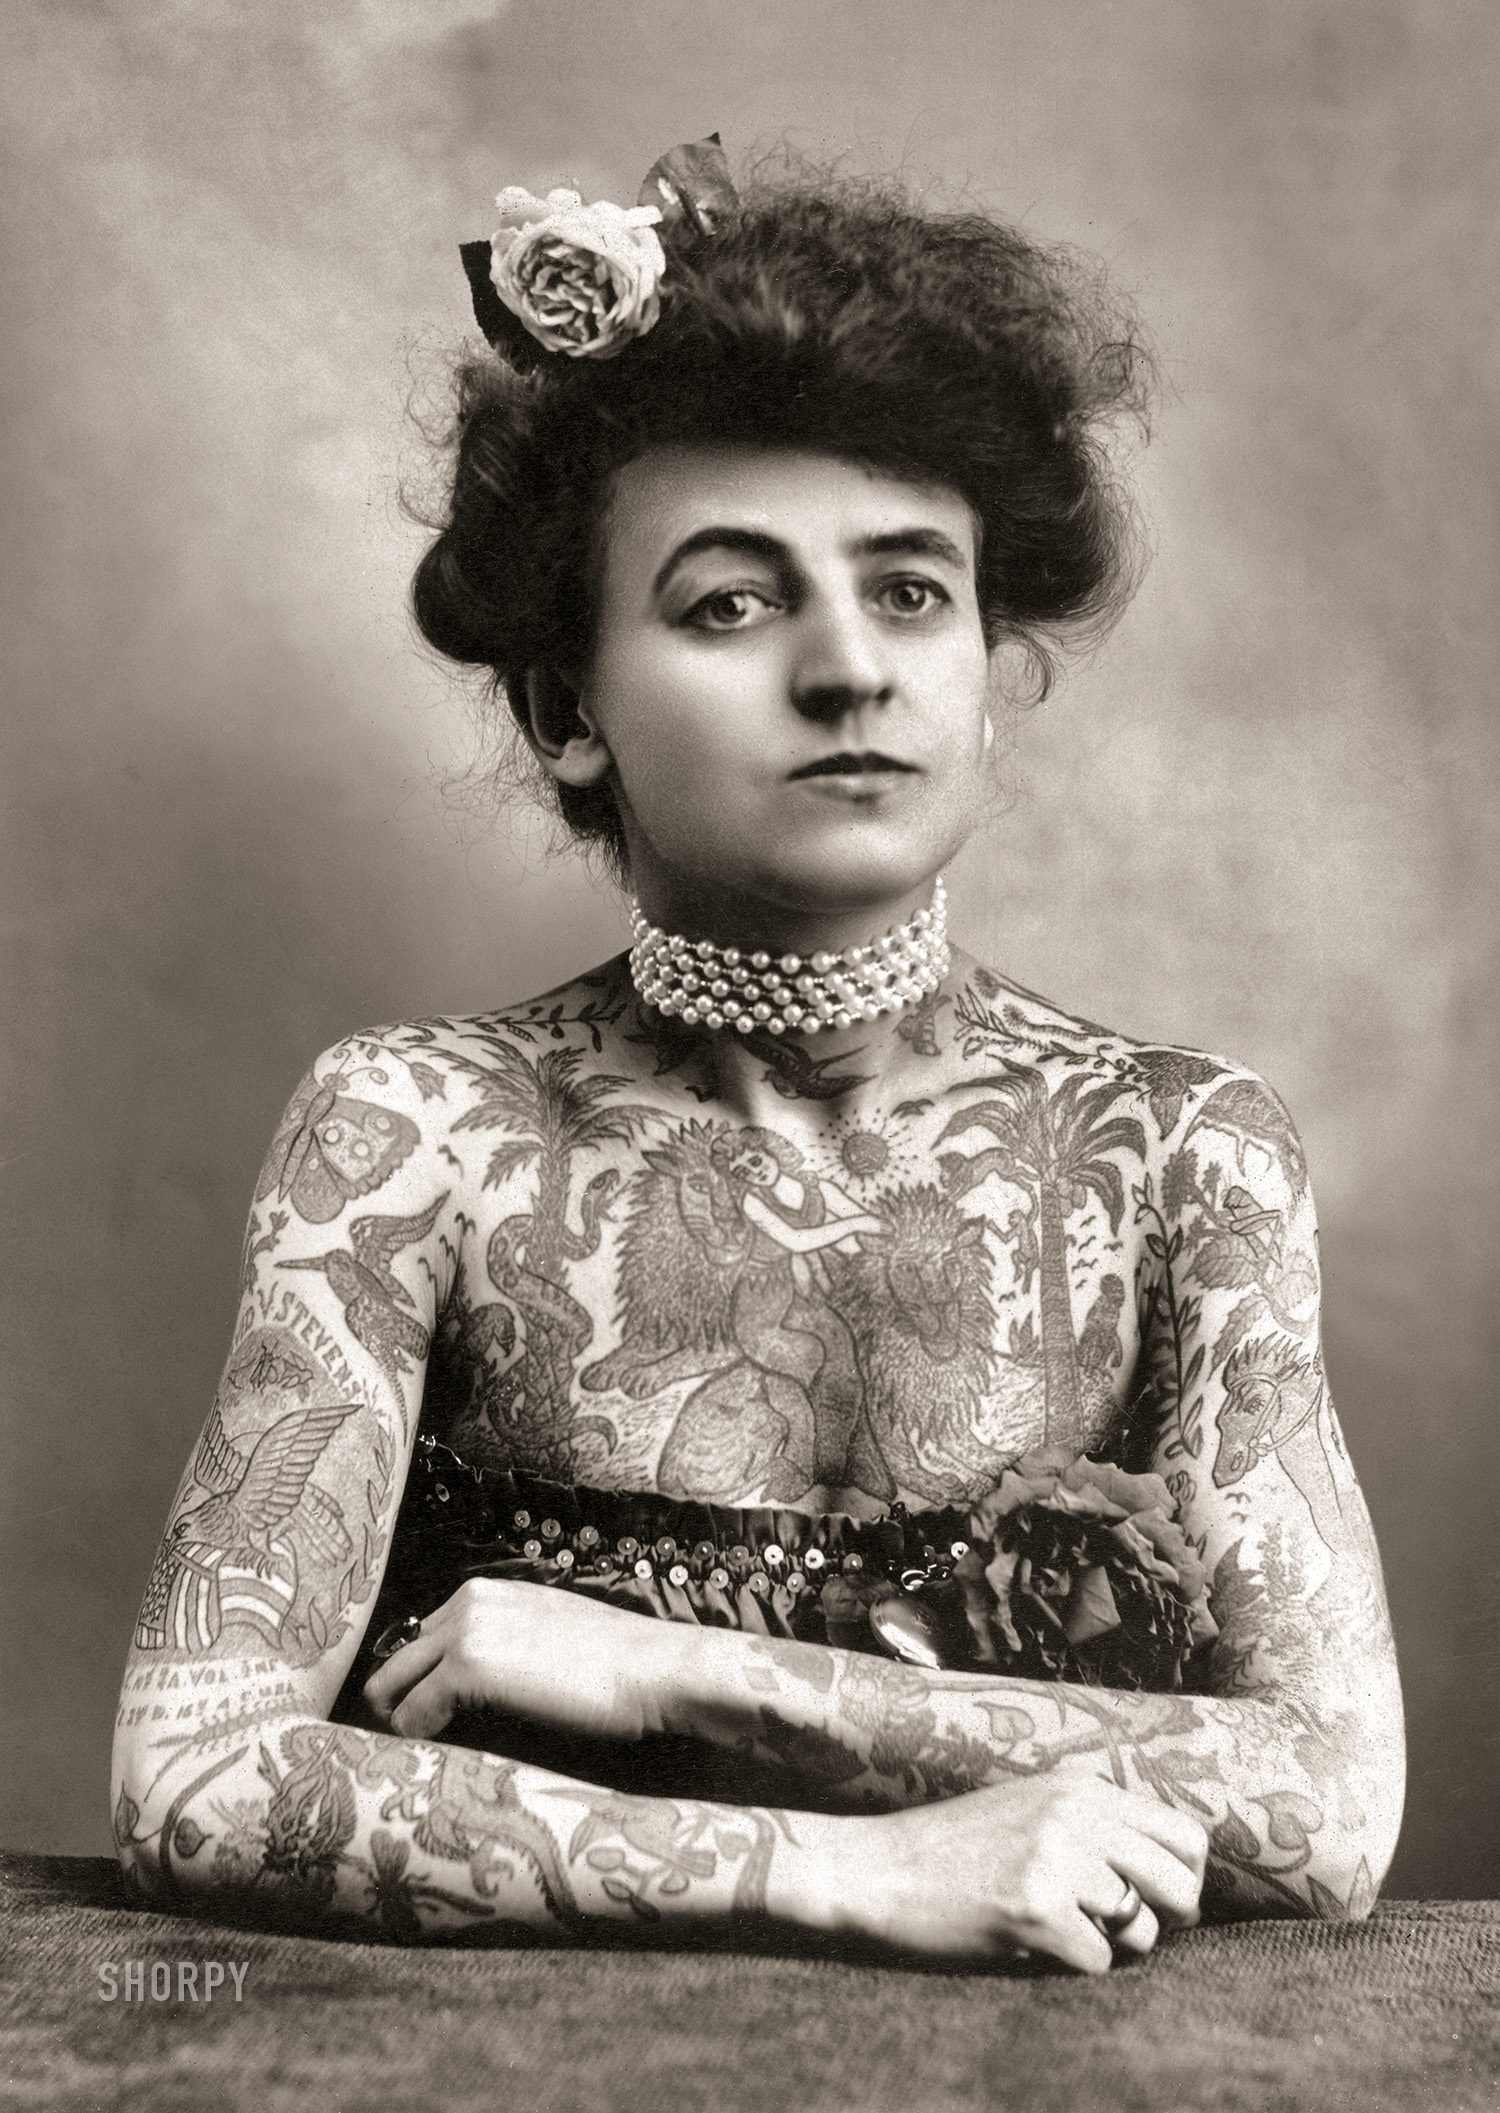 1907. "Maud Wagner, circus performer and tattooist." Maud Stevens Wagner (1877-1961), thought to be America's first female tattoo artist. Plaza Gallery, Los Angeles. View full size.